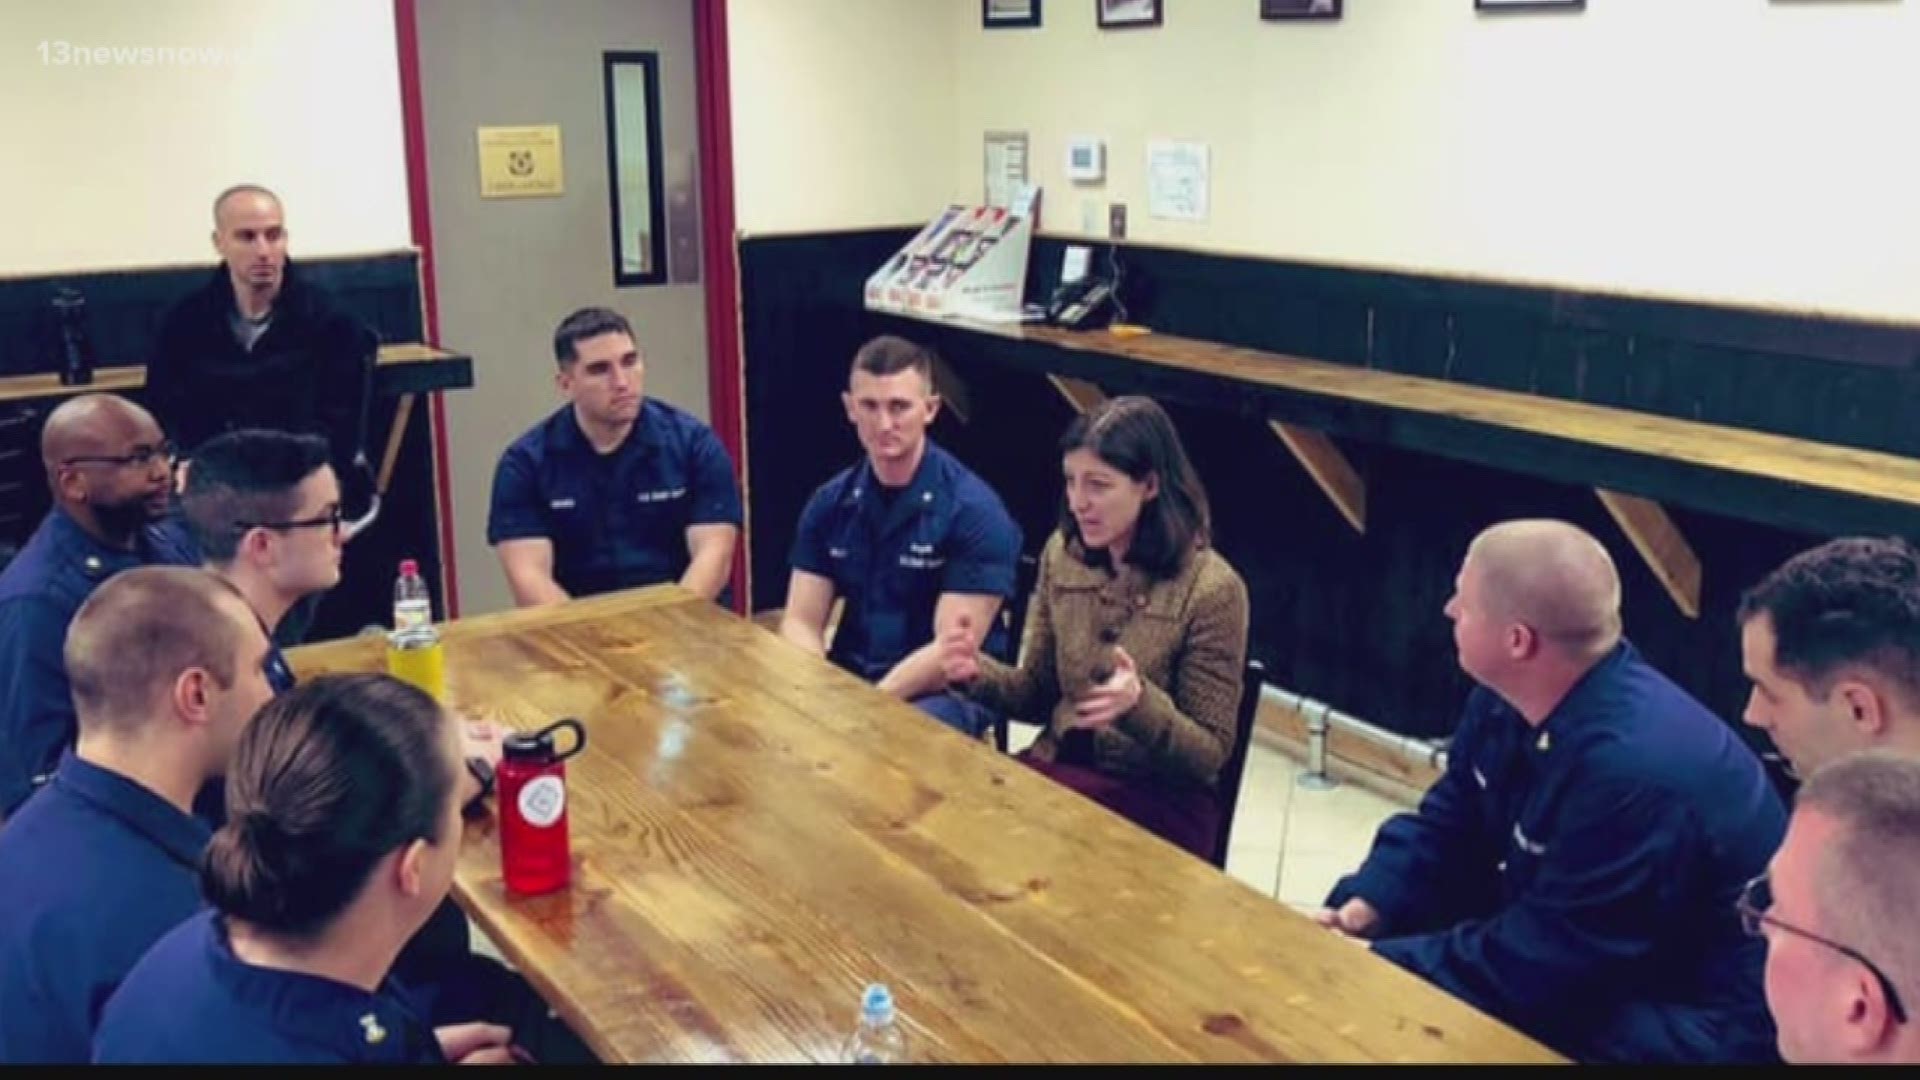 Congresswoman Elaine Luria took time over the weekend to meet with Coast Guard members and TSA agents to talk with them about the shutdown.